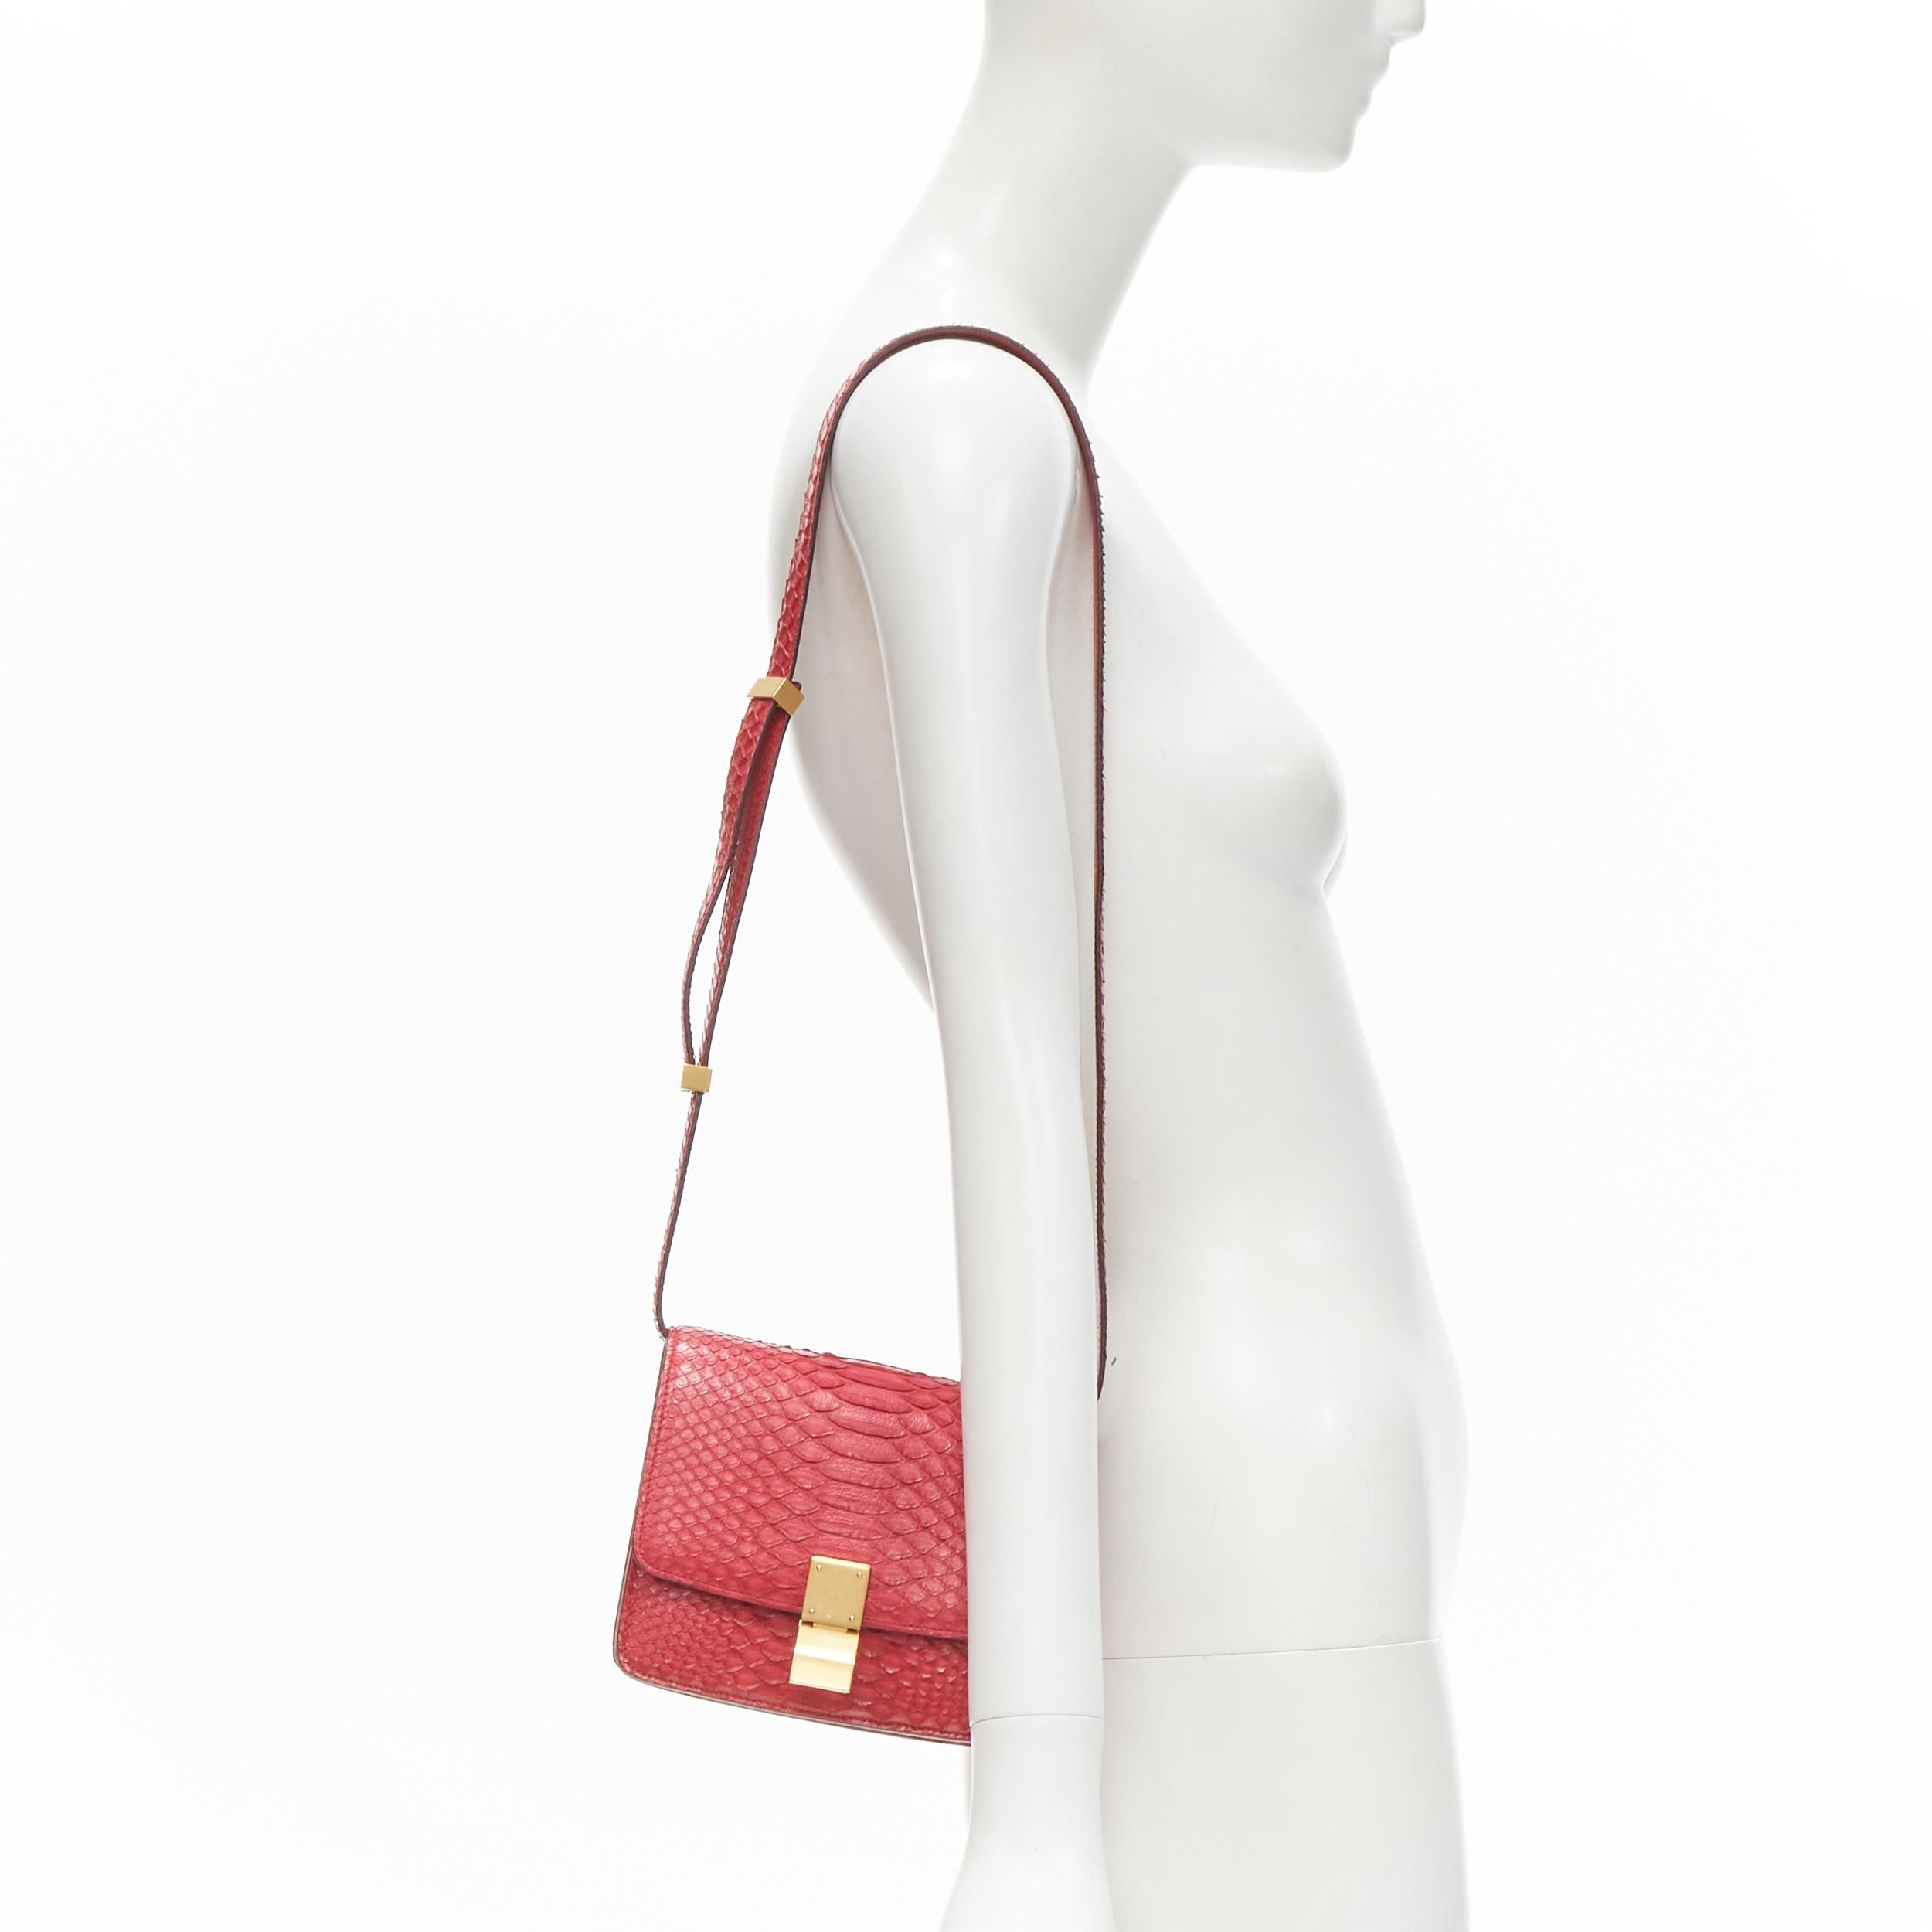 OLD CELINE Small Classic Box Bag red scalred leather gold clasp crossbody bag
Brand: Celine
Designer: Phoebe Philo
Model: Small Classic Box Bag
Material: Leather
Color: Red
Pattern: Solid
Closure: Clasp
Extra Detail: Scaled leather in red. Antique